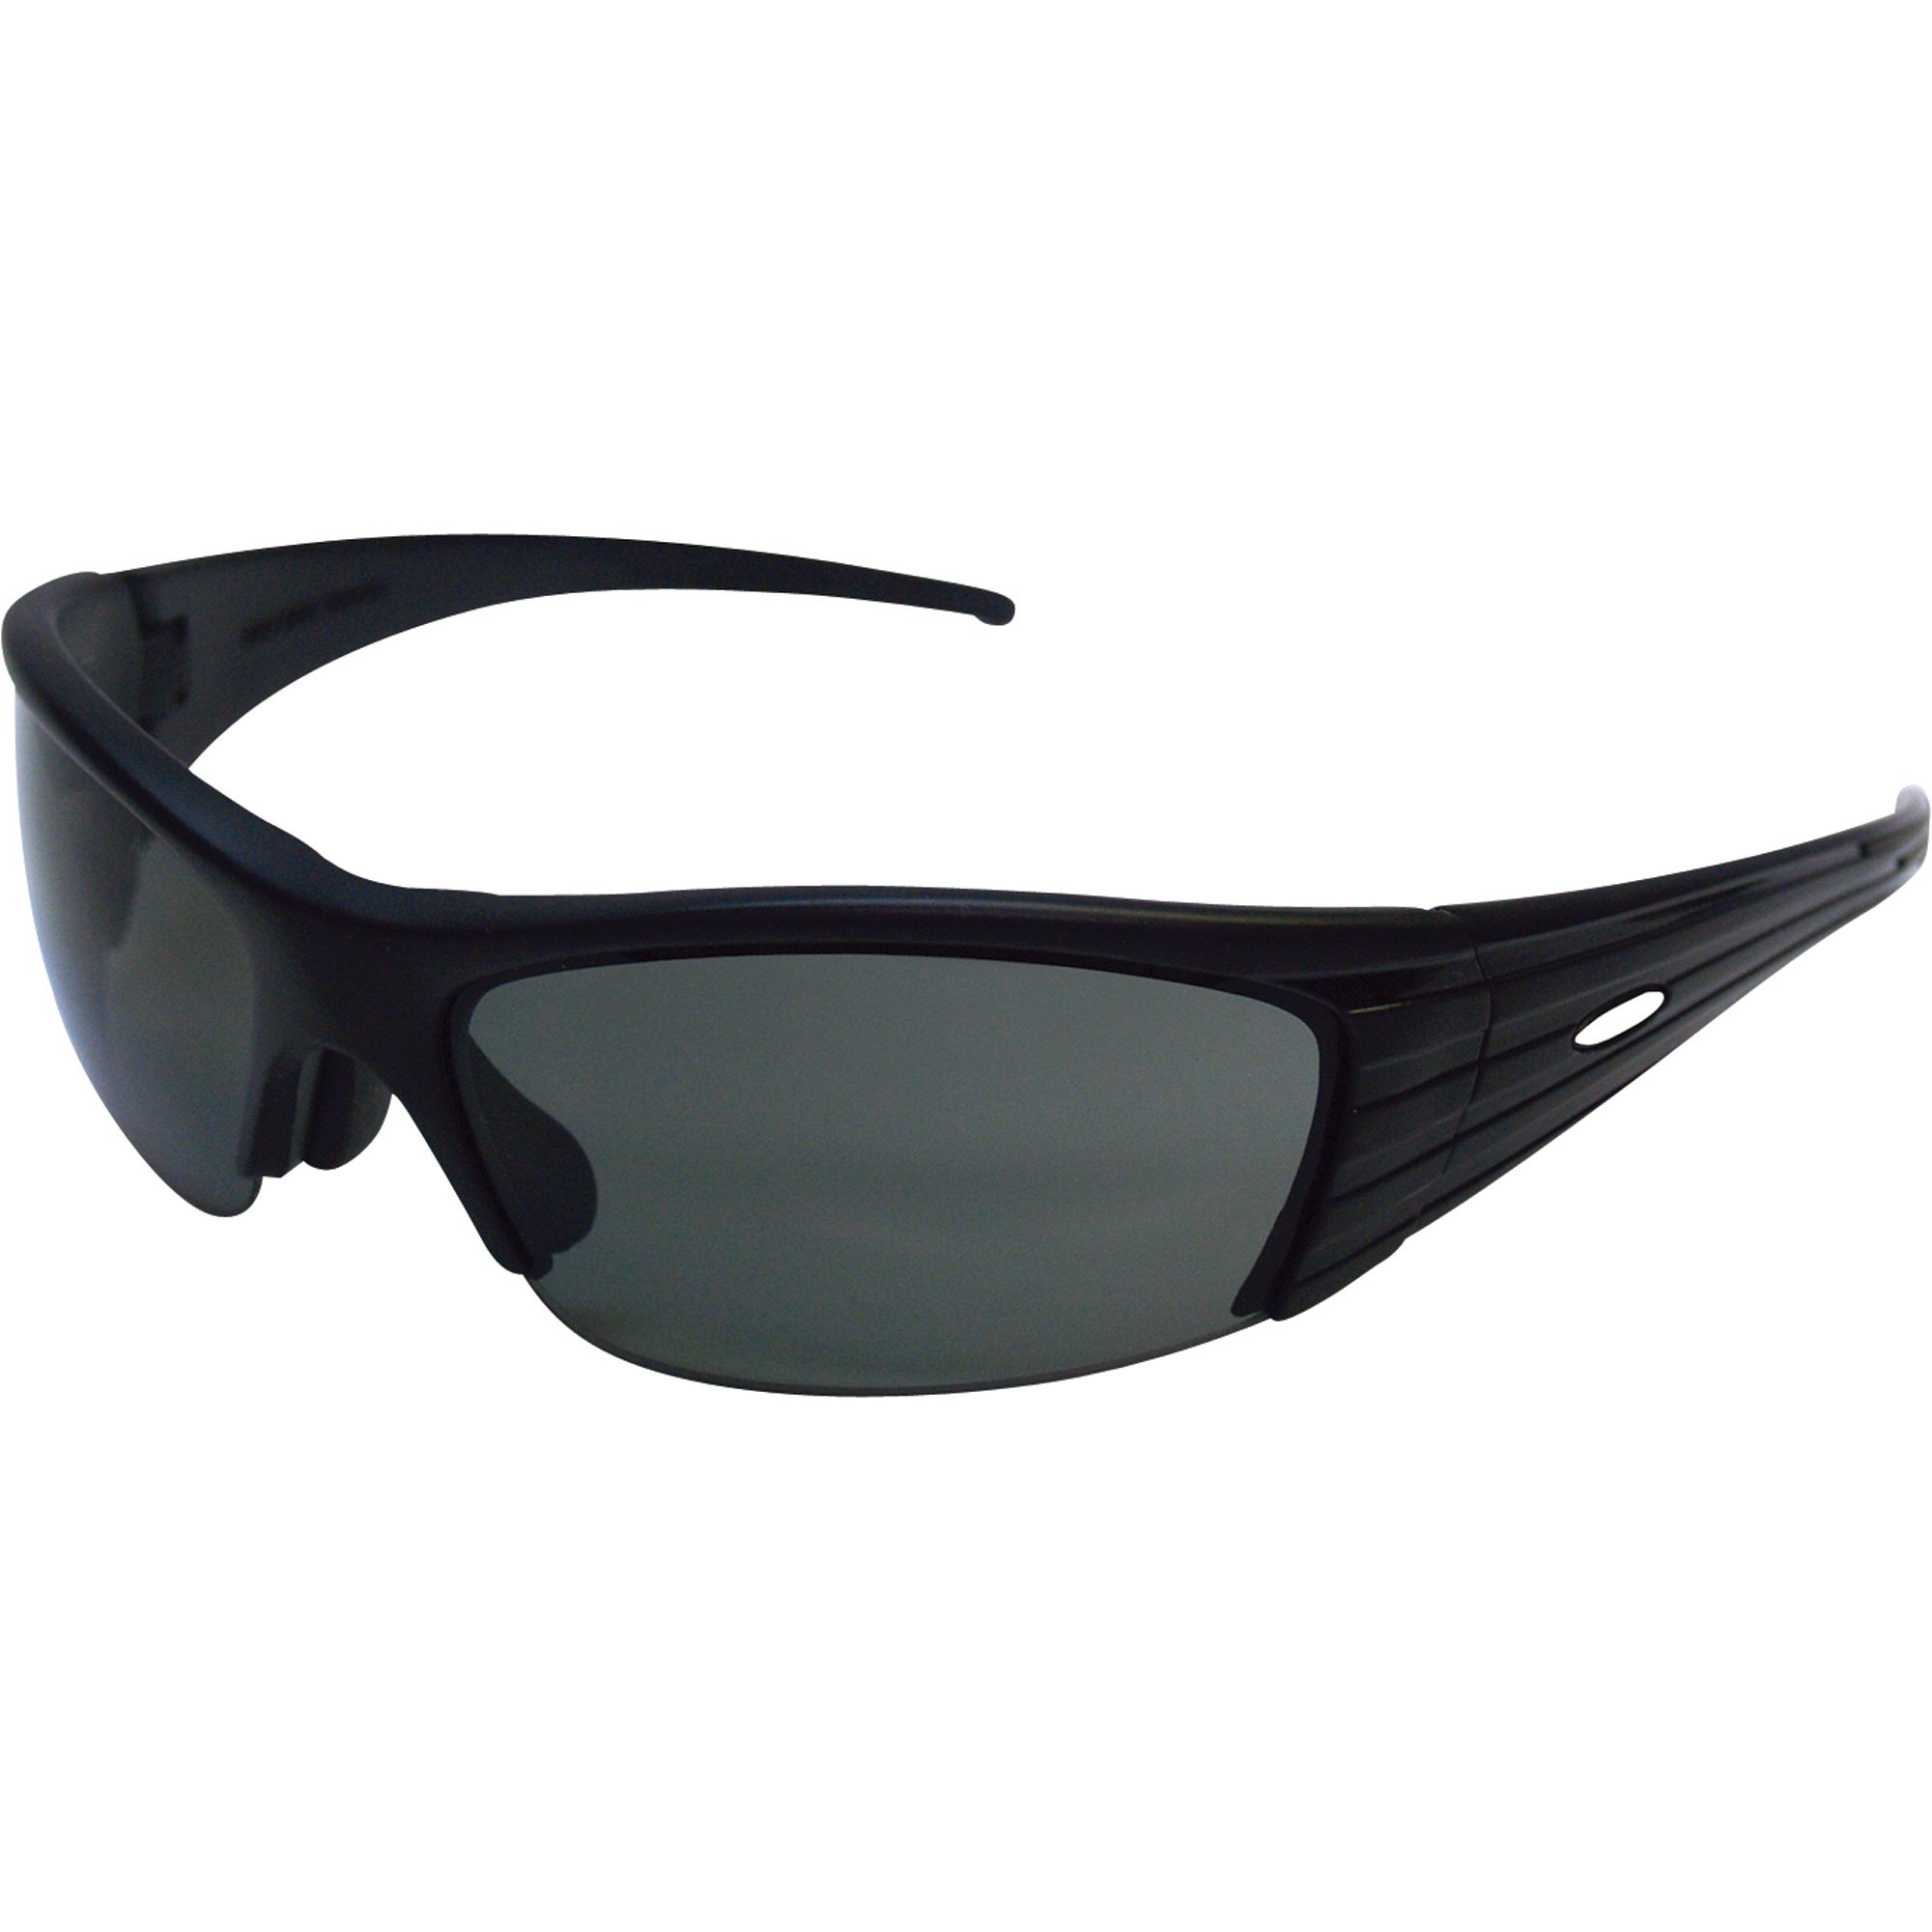 3M Fuel X2P Polarized Safety Glasses — Shaded Lens, Model# 90879